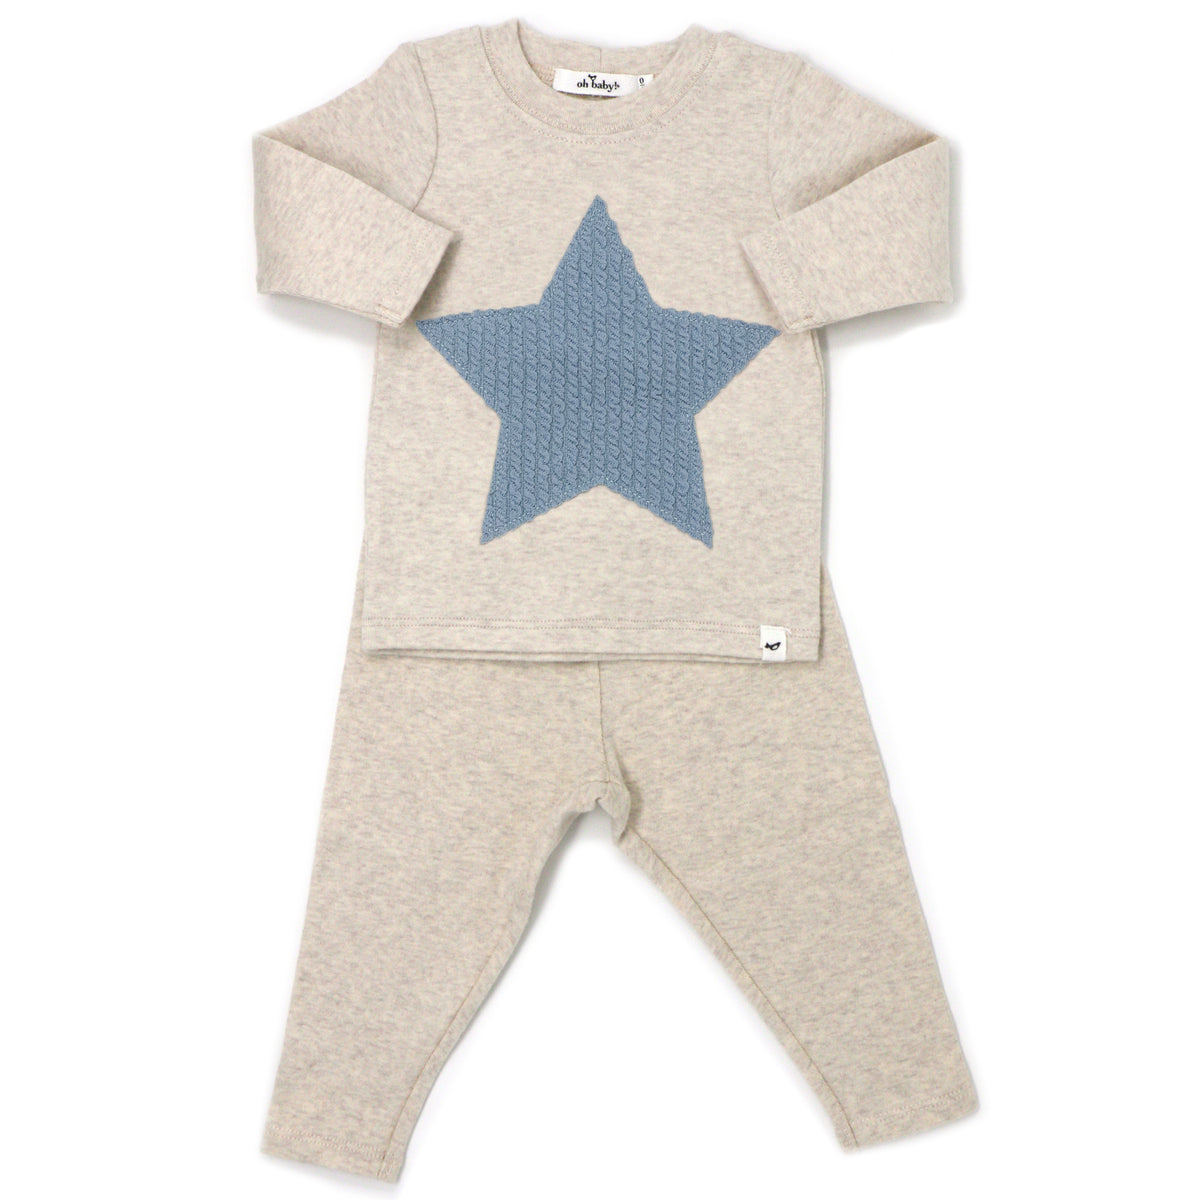 oh baby! Two Piece Set - Fog Star Applique - Sand